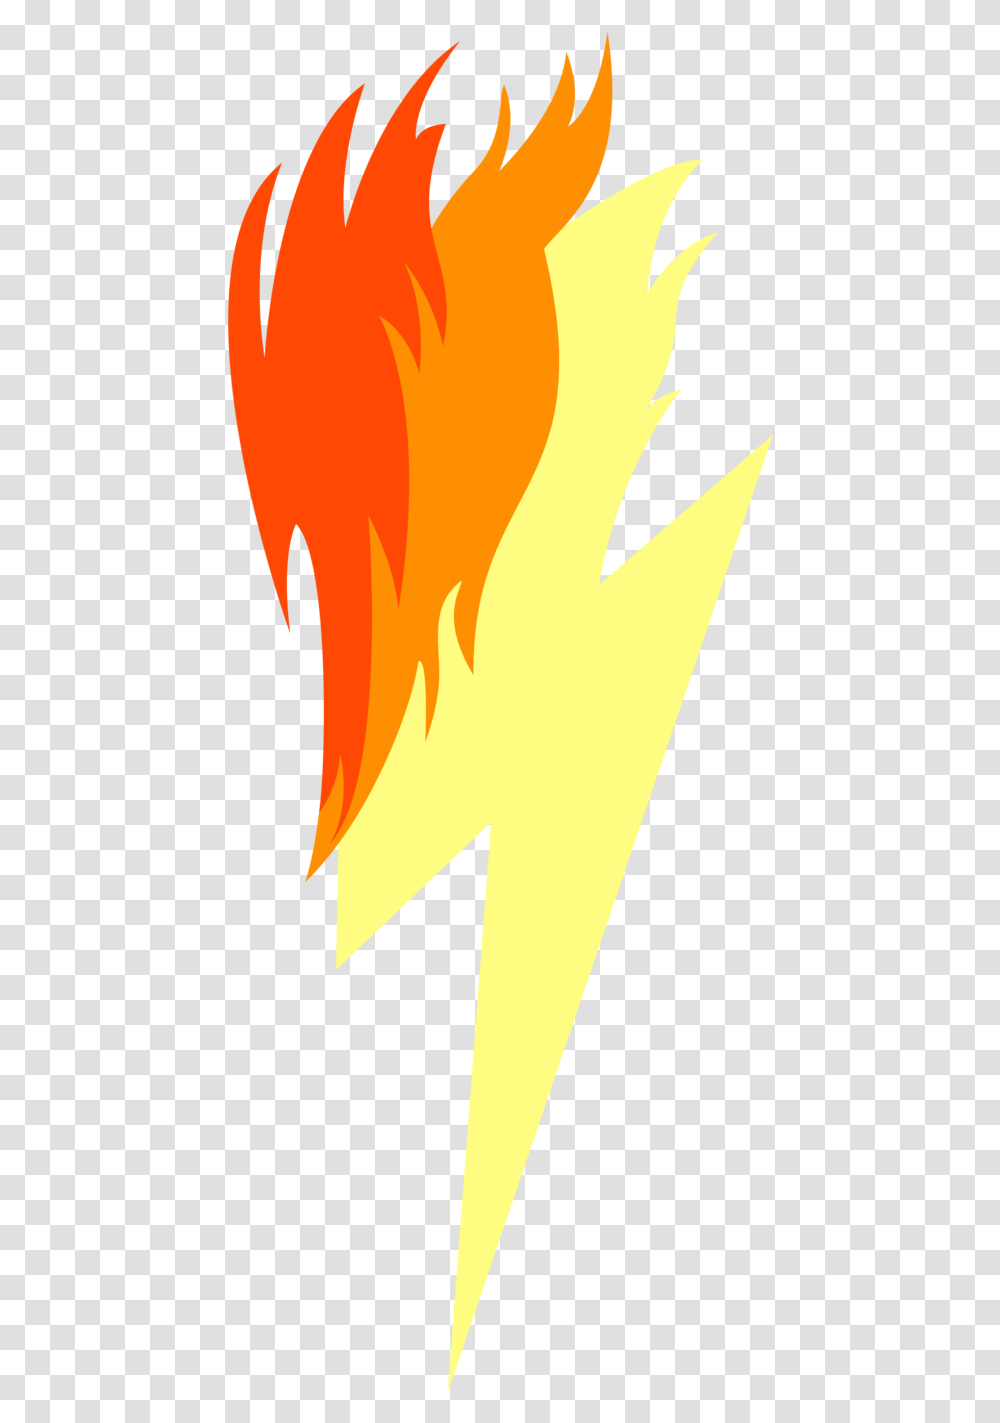 My Little Pony Custom Cutie Marks, Fire, Light, Flame Transparent Png